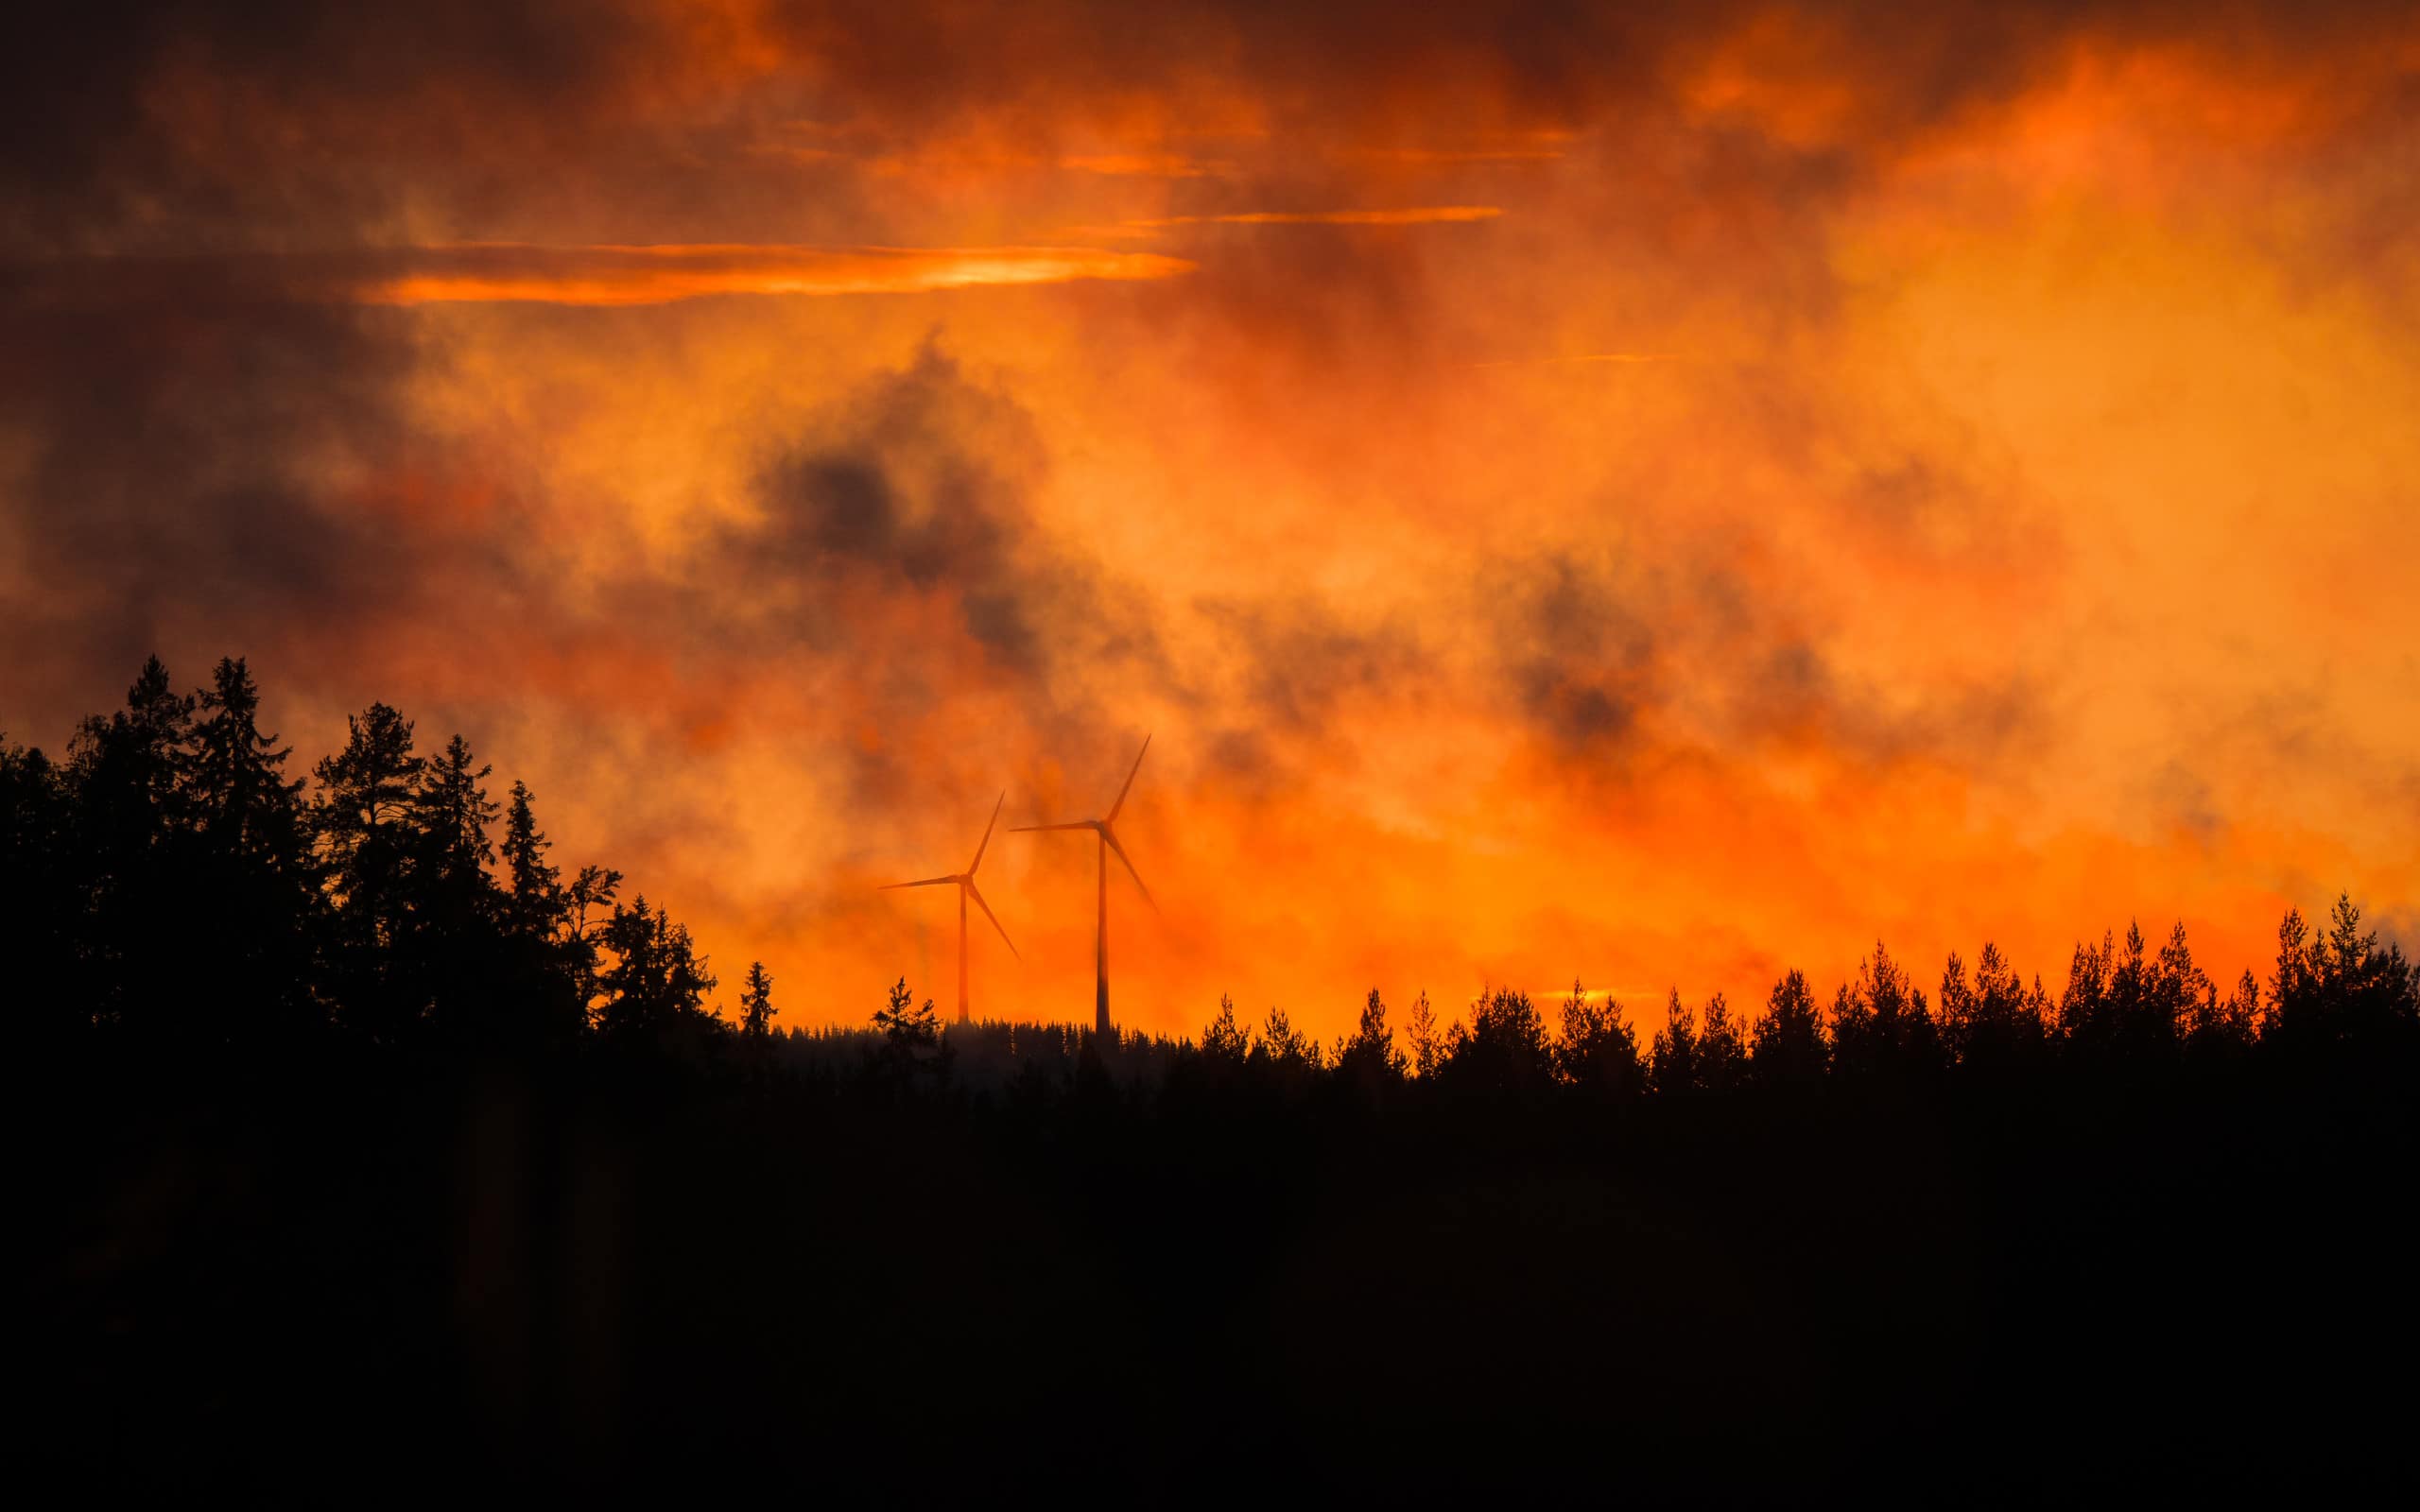 Forest fire in night time. Windmills in background. Dark image with silhouette of tree.